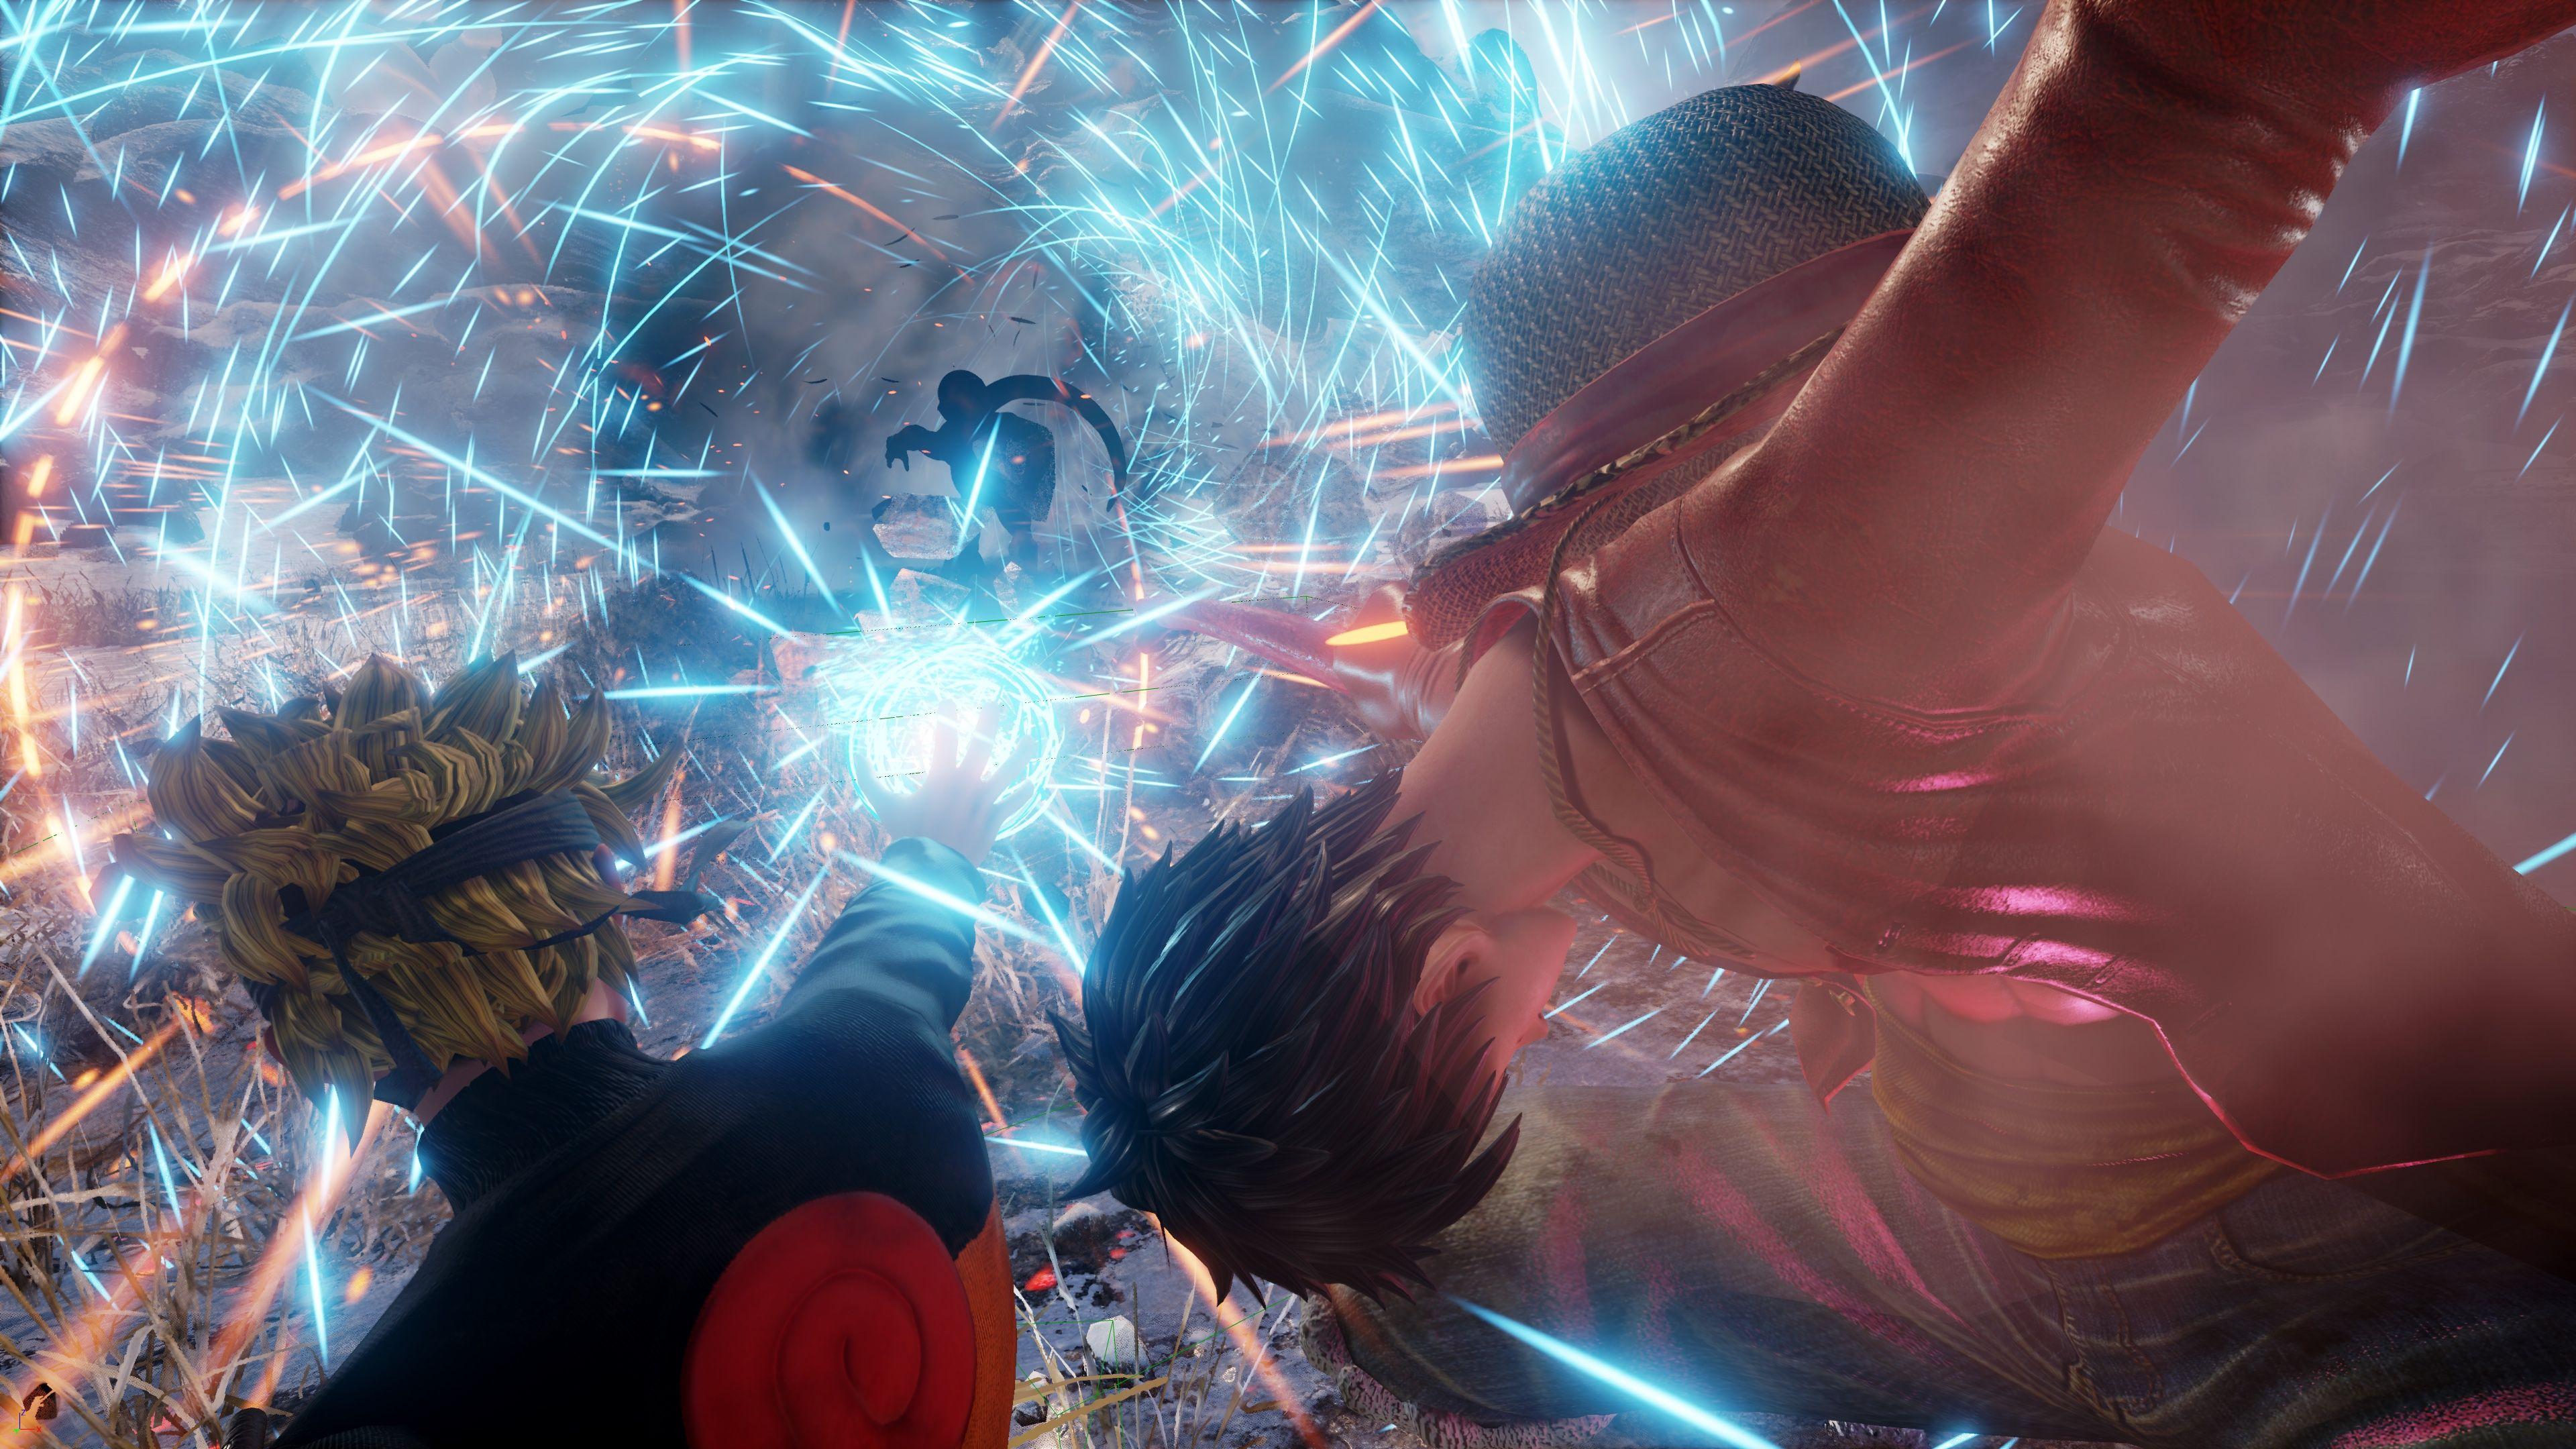 Jump Force brings together Dragon Ball, One Piece, Death Note